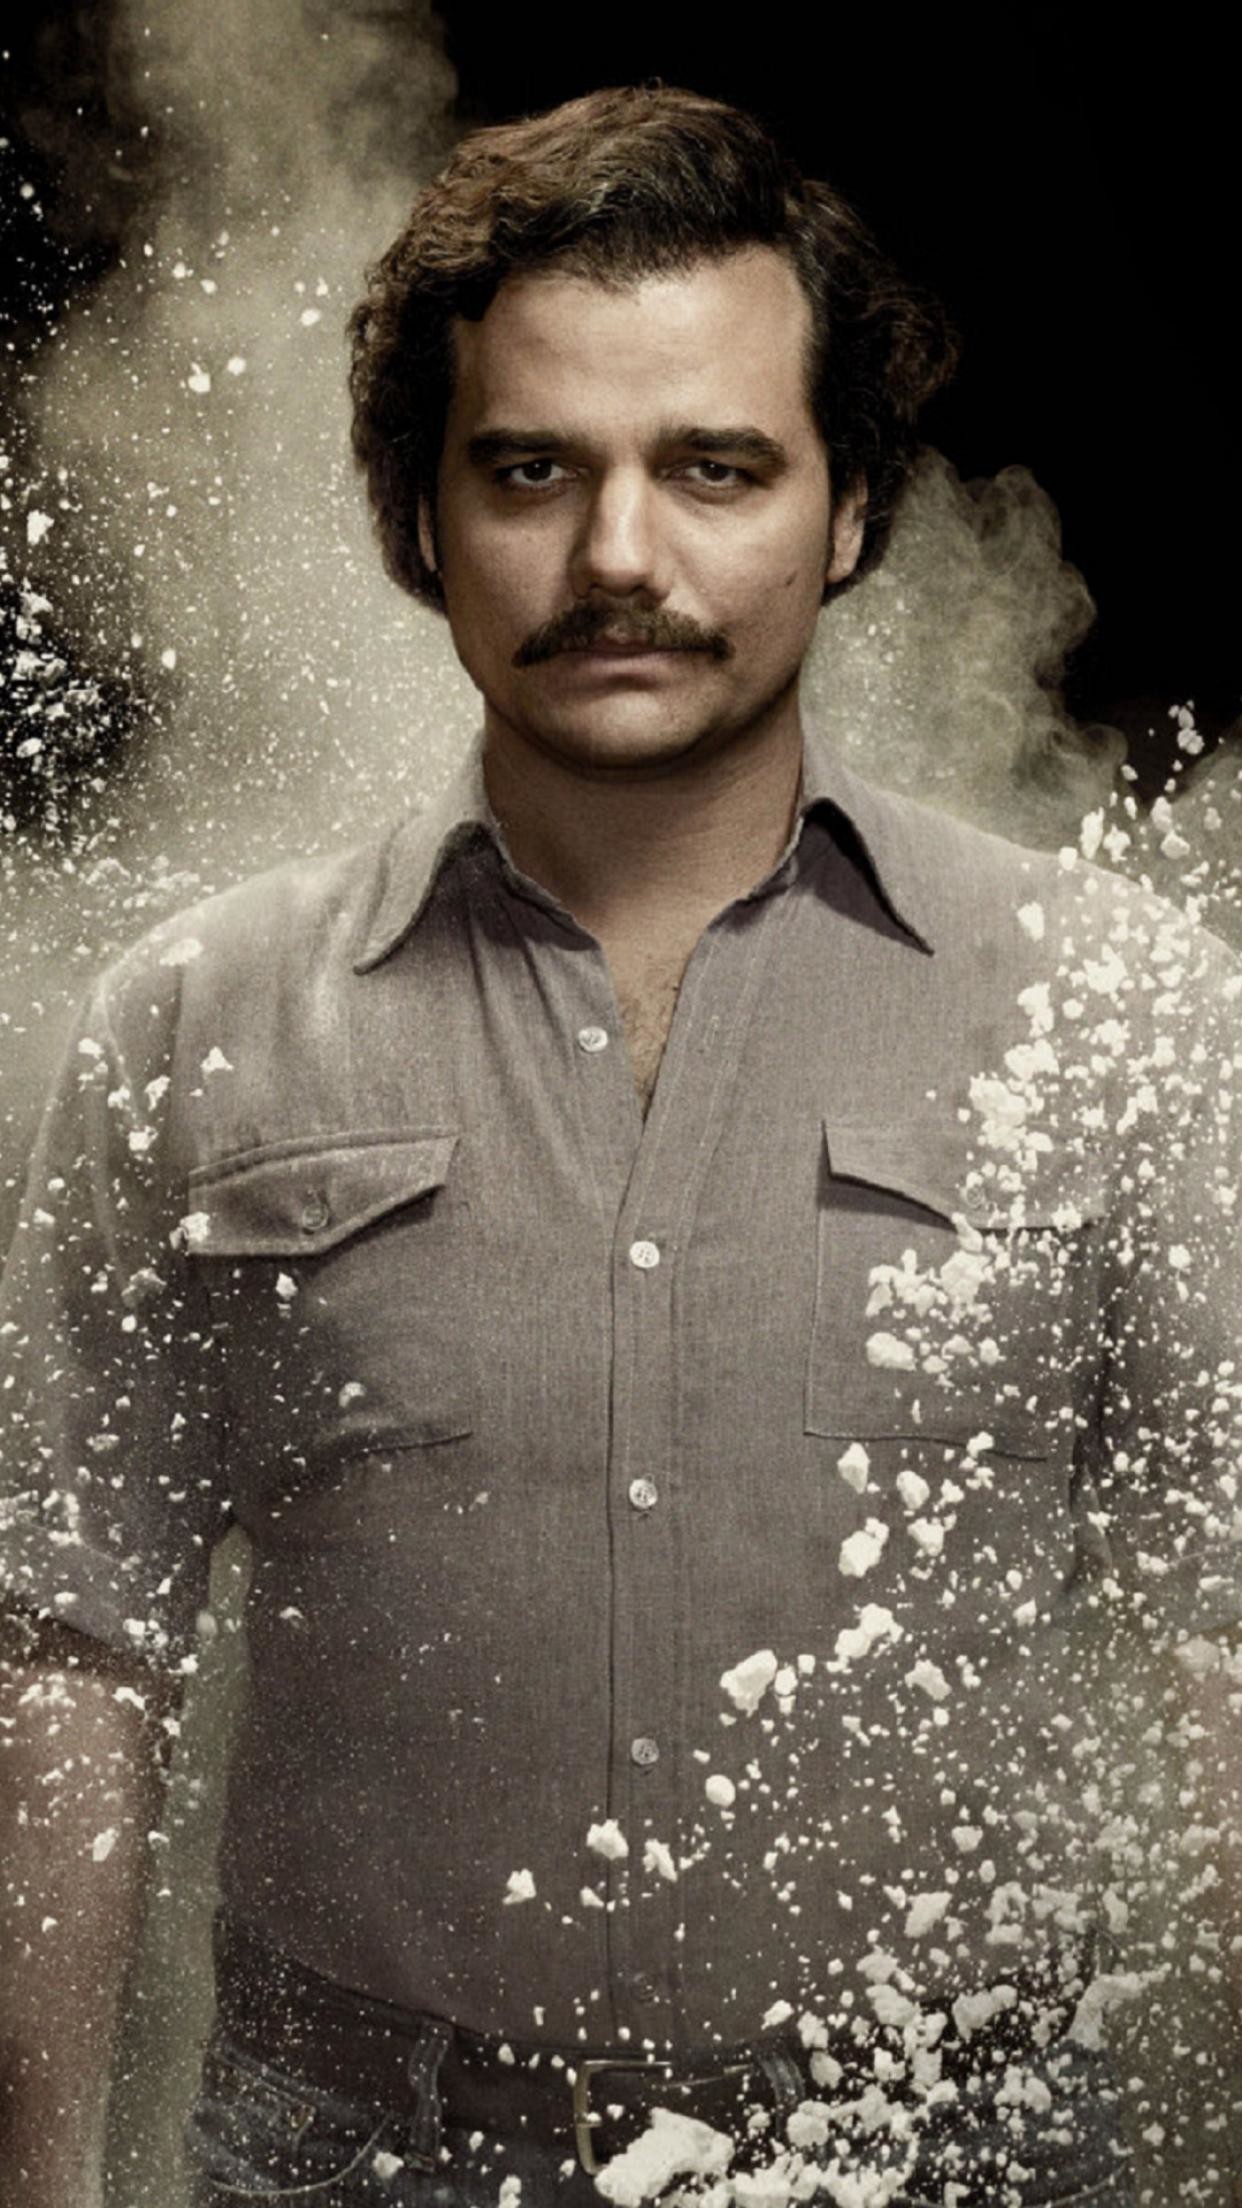 Narcos Hd Poster Wallpapers